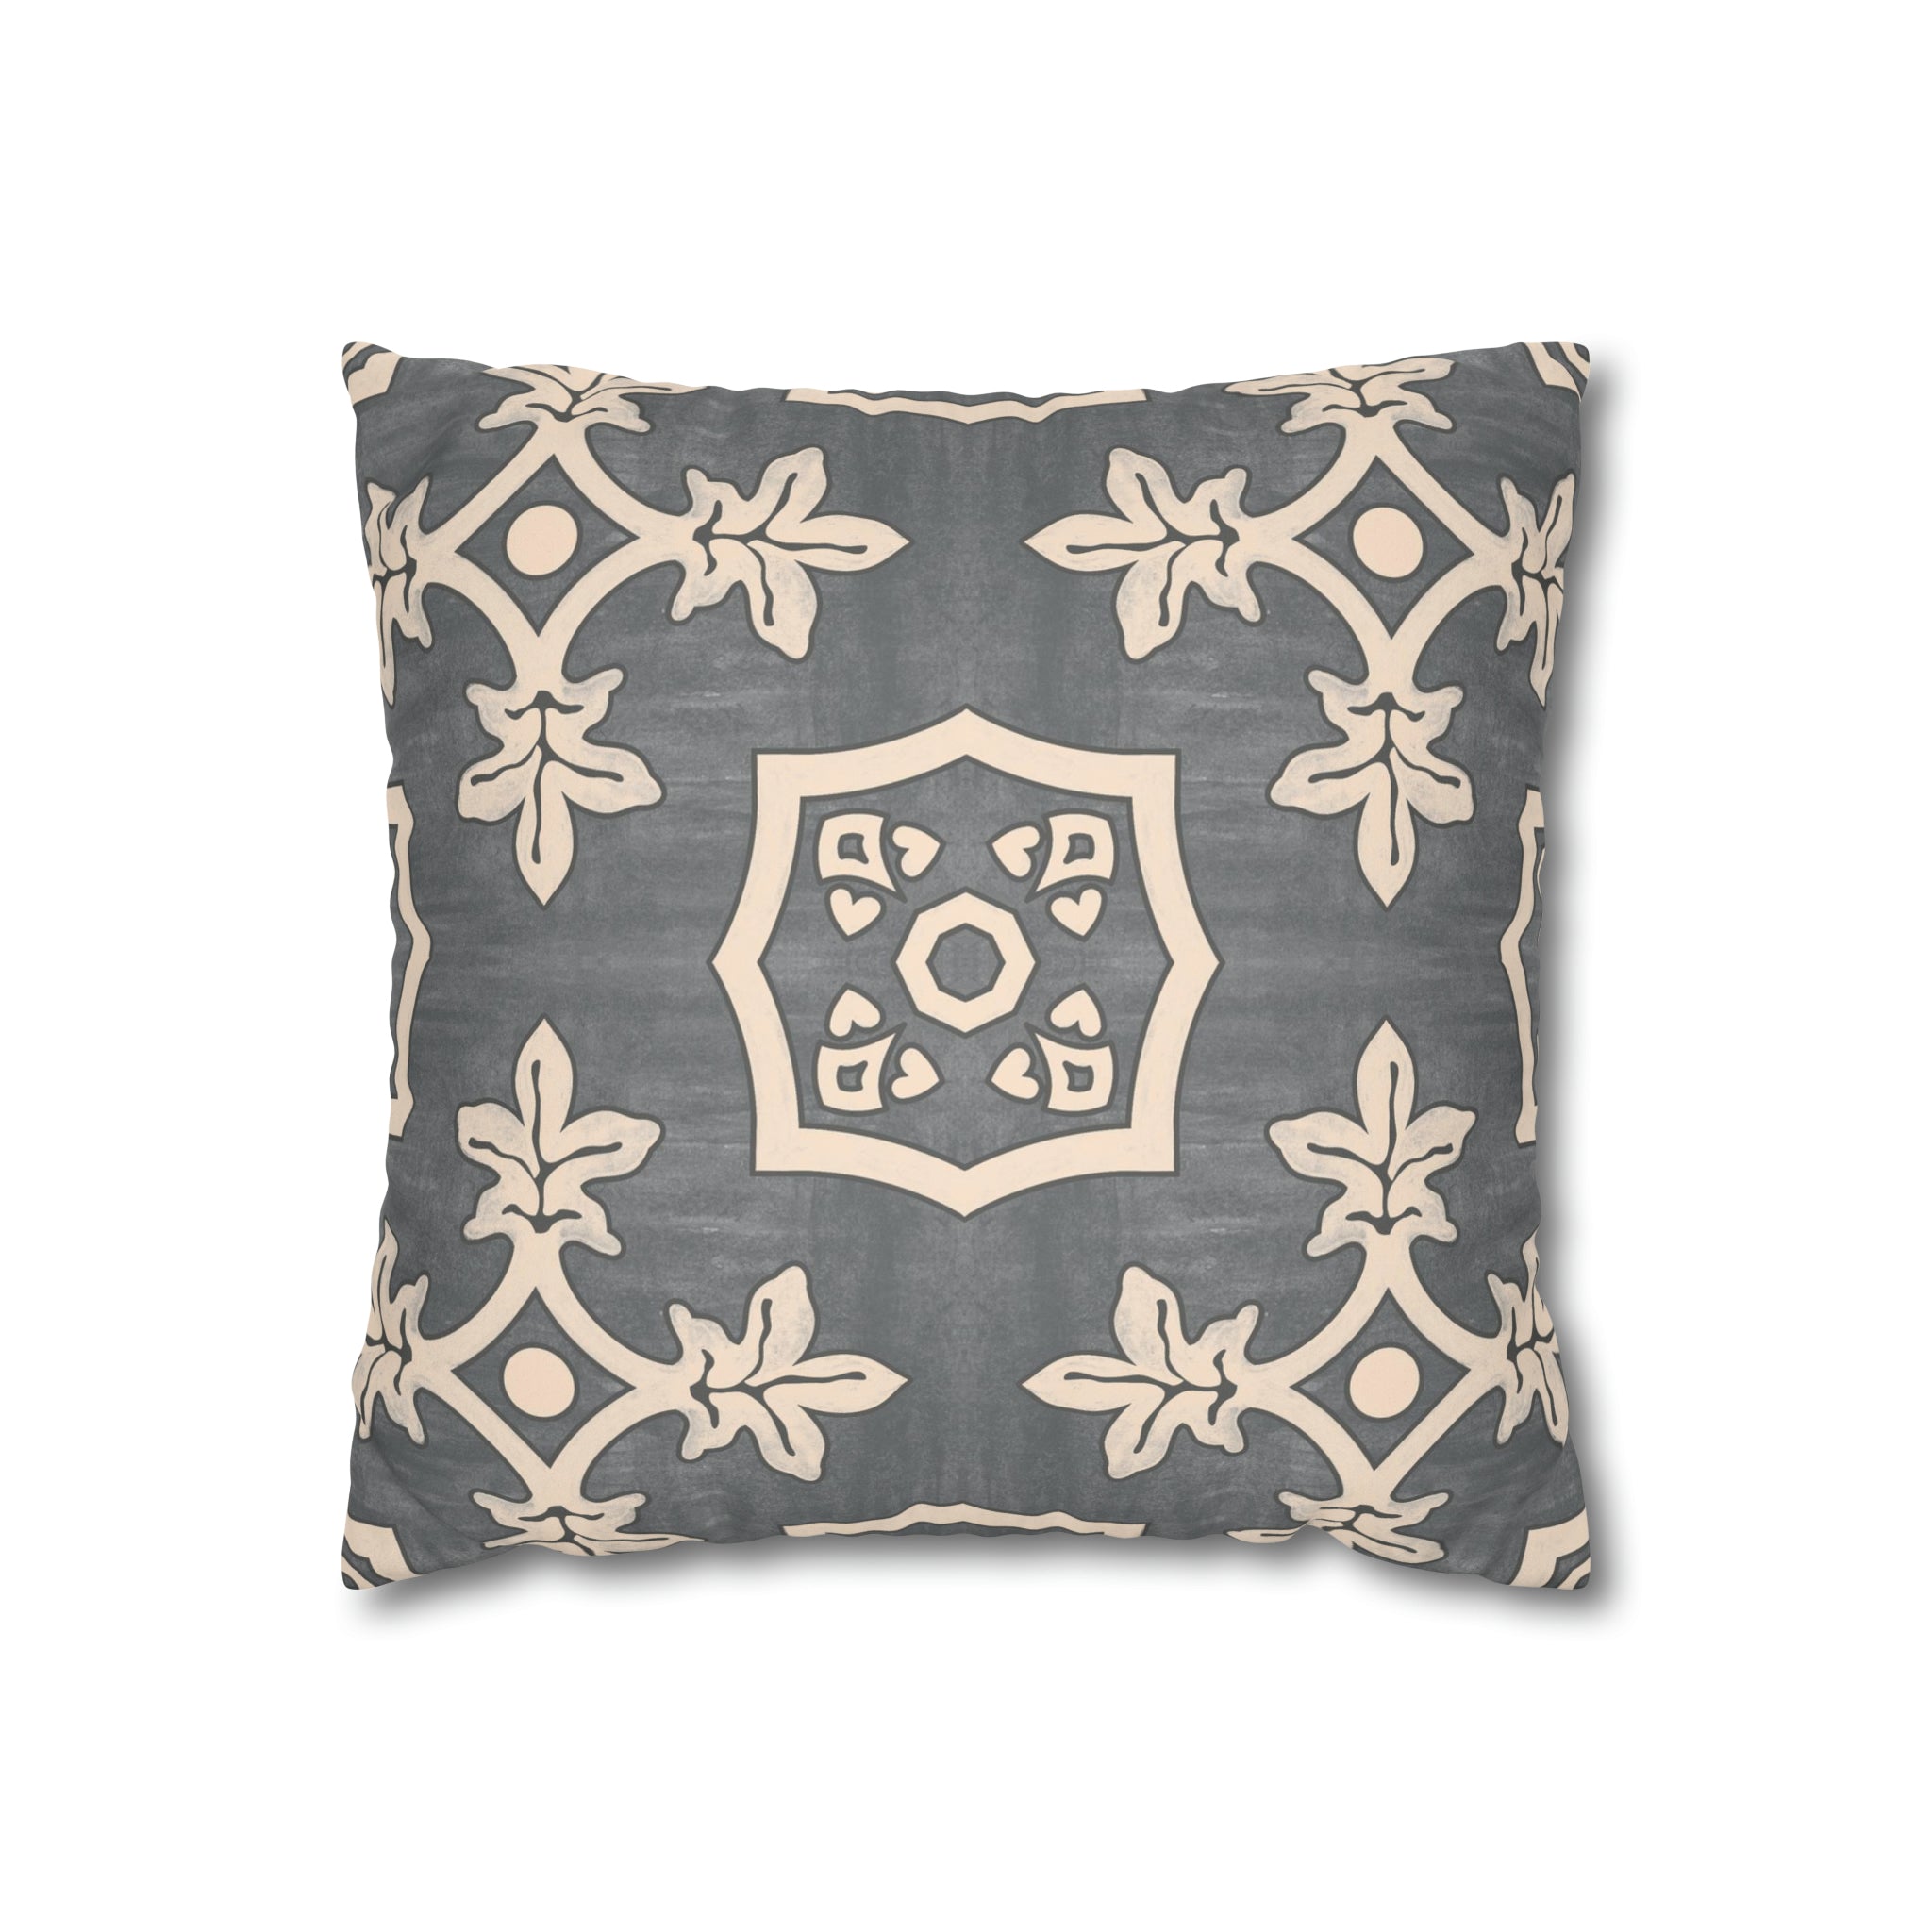 Palma Fonte Grey Microsuede Square Pillow Cover